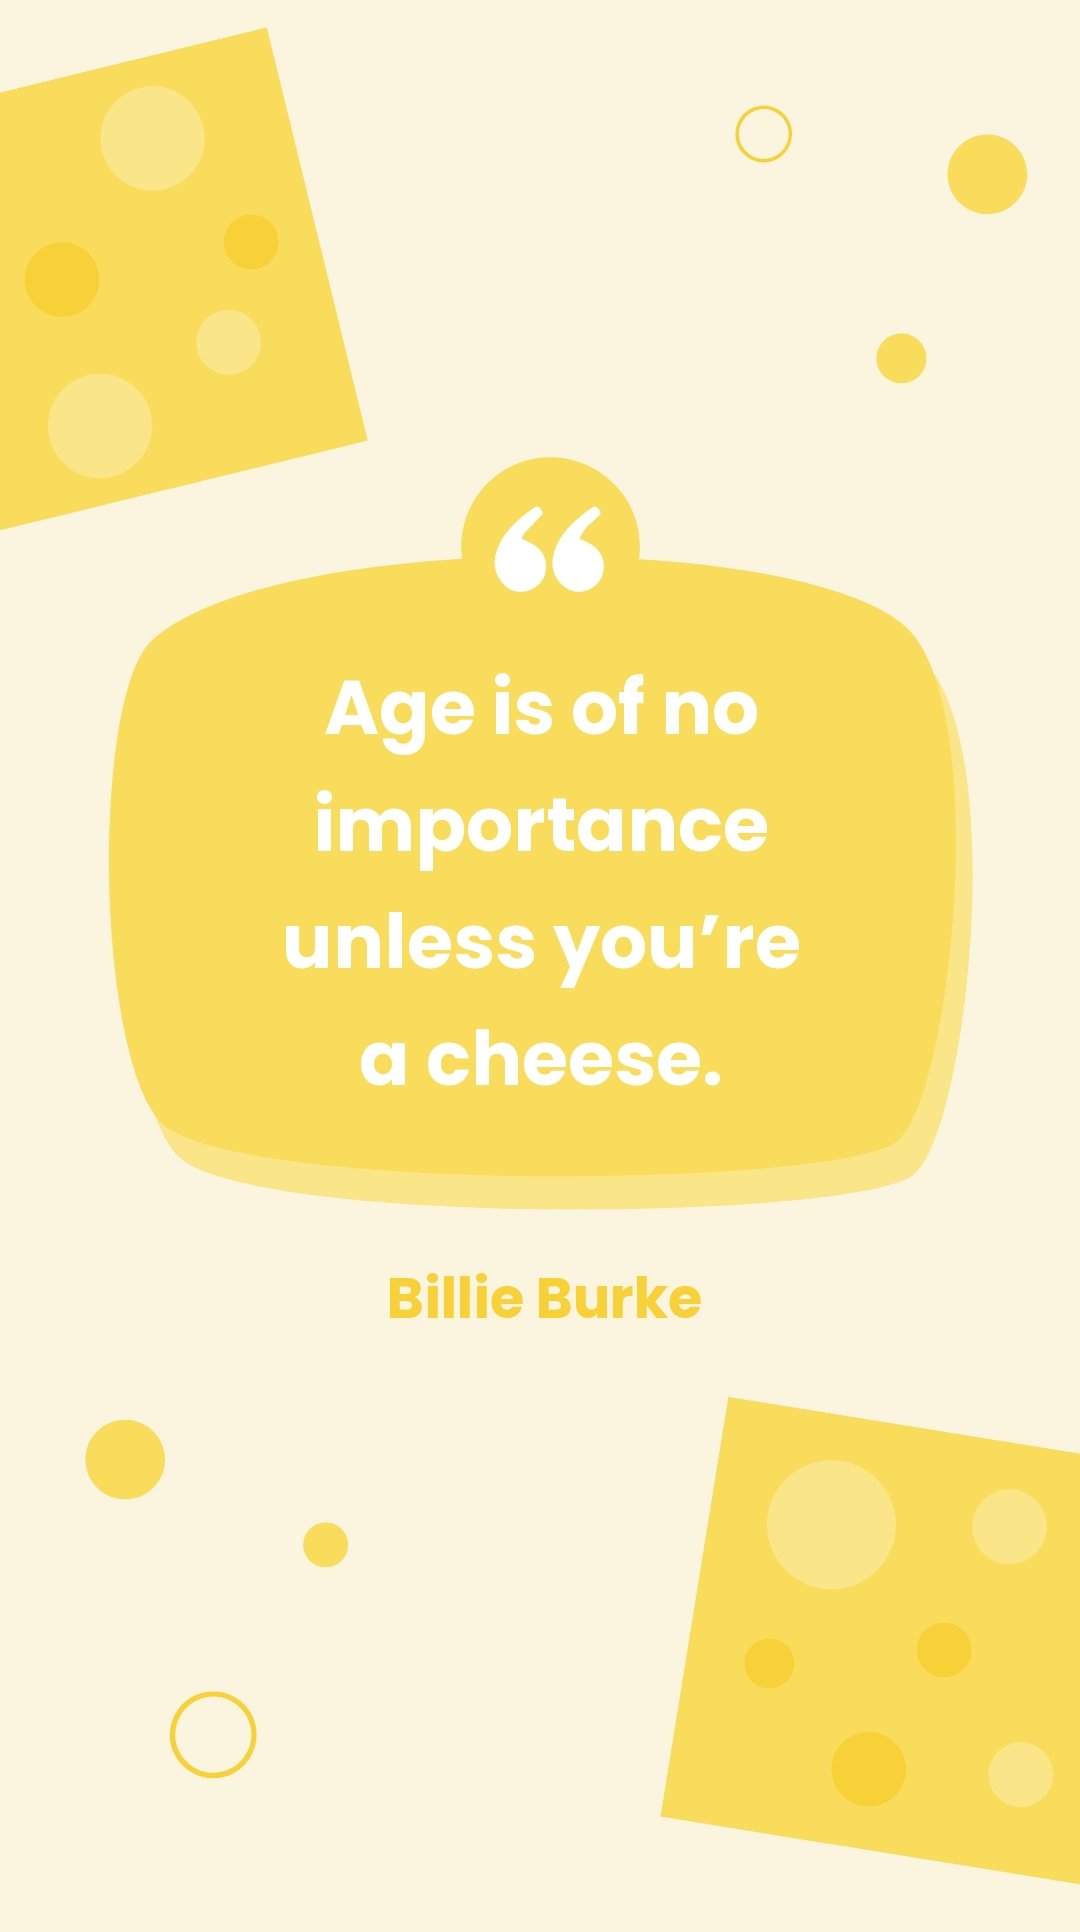 Billie Burke - Age is of no importance unless you’re a cheese.